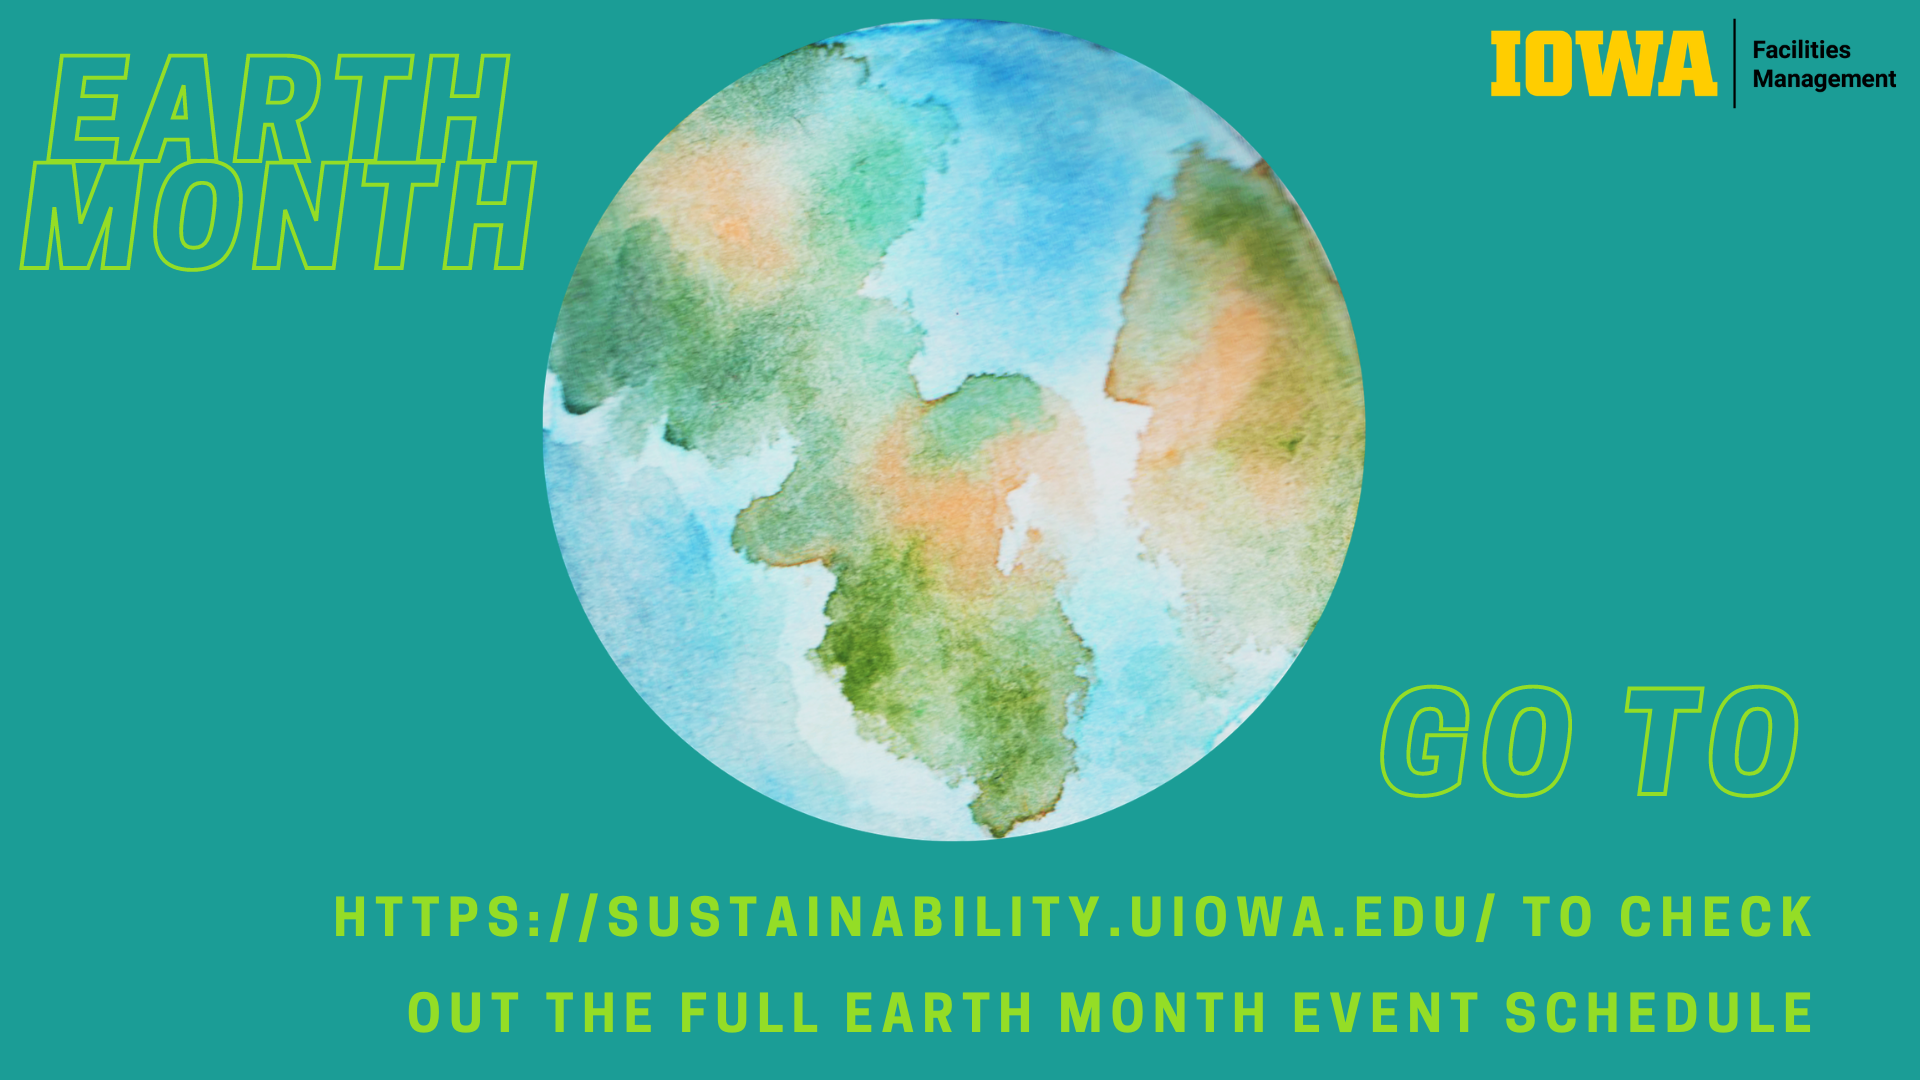 Earth Month: Go to the UI Sustainability page to see the Earth Month schedule.